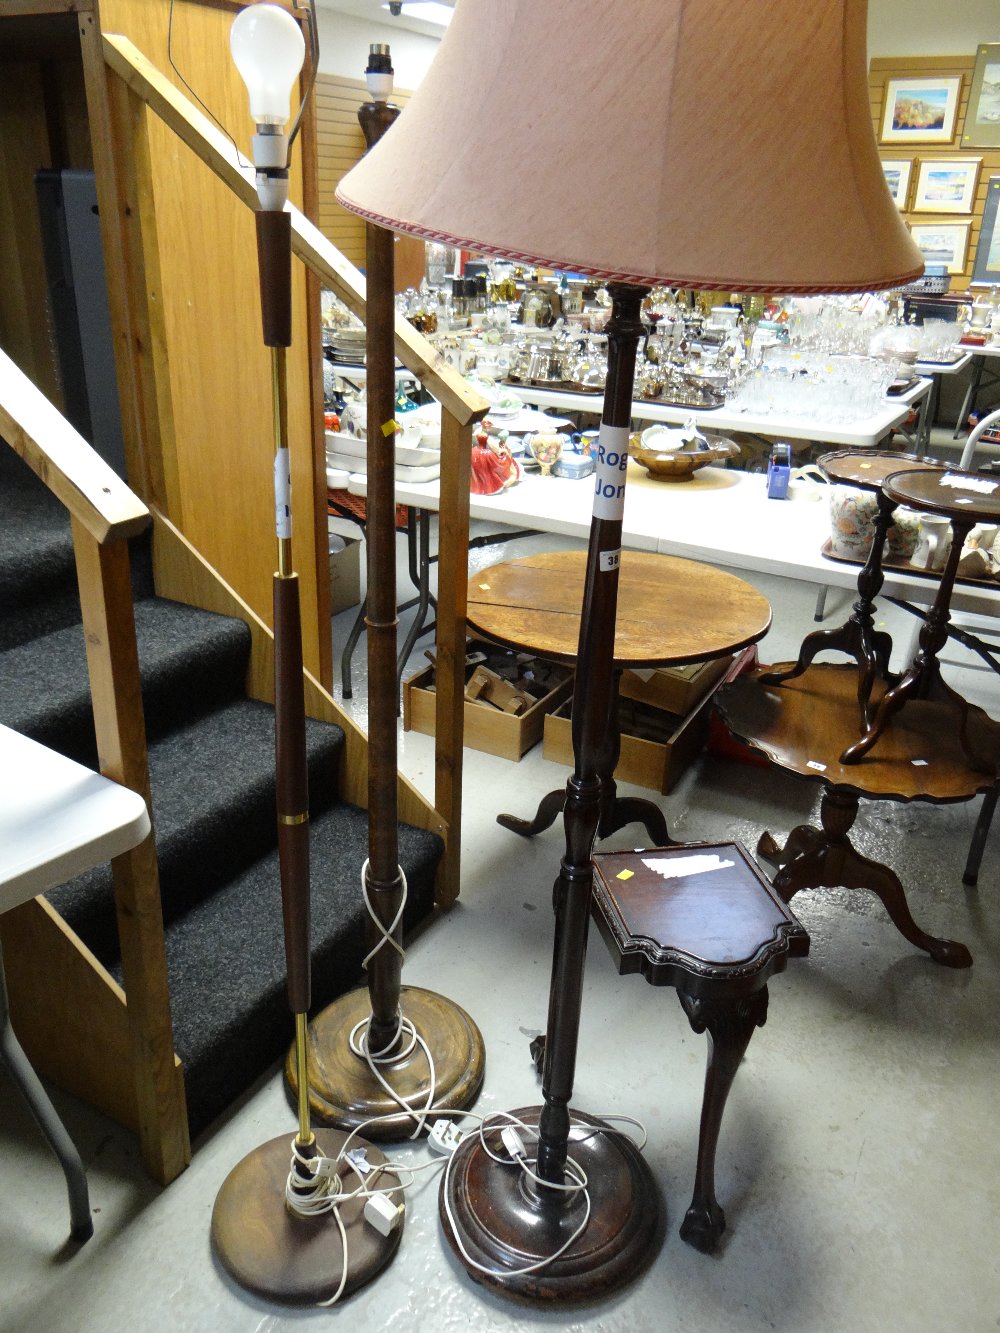 Three sundry standard lamps and a three footed mahogany antique stand